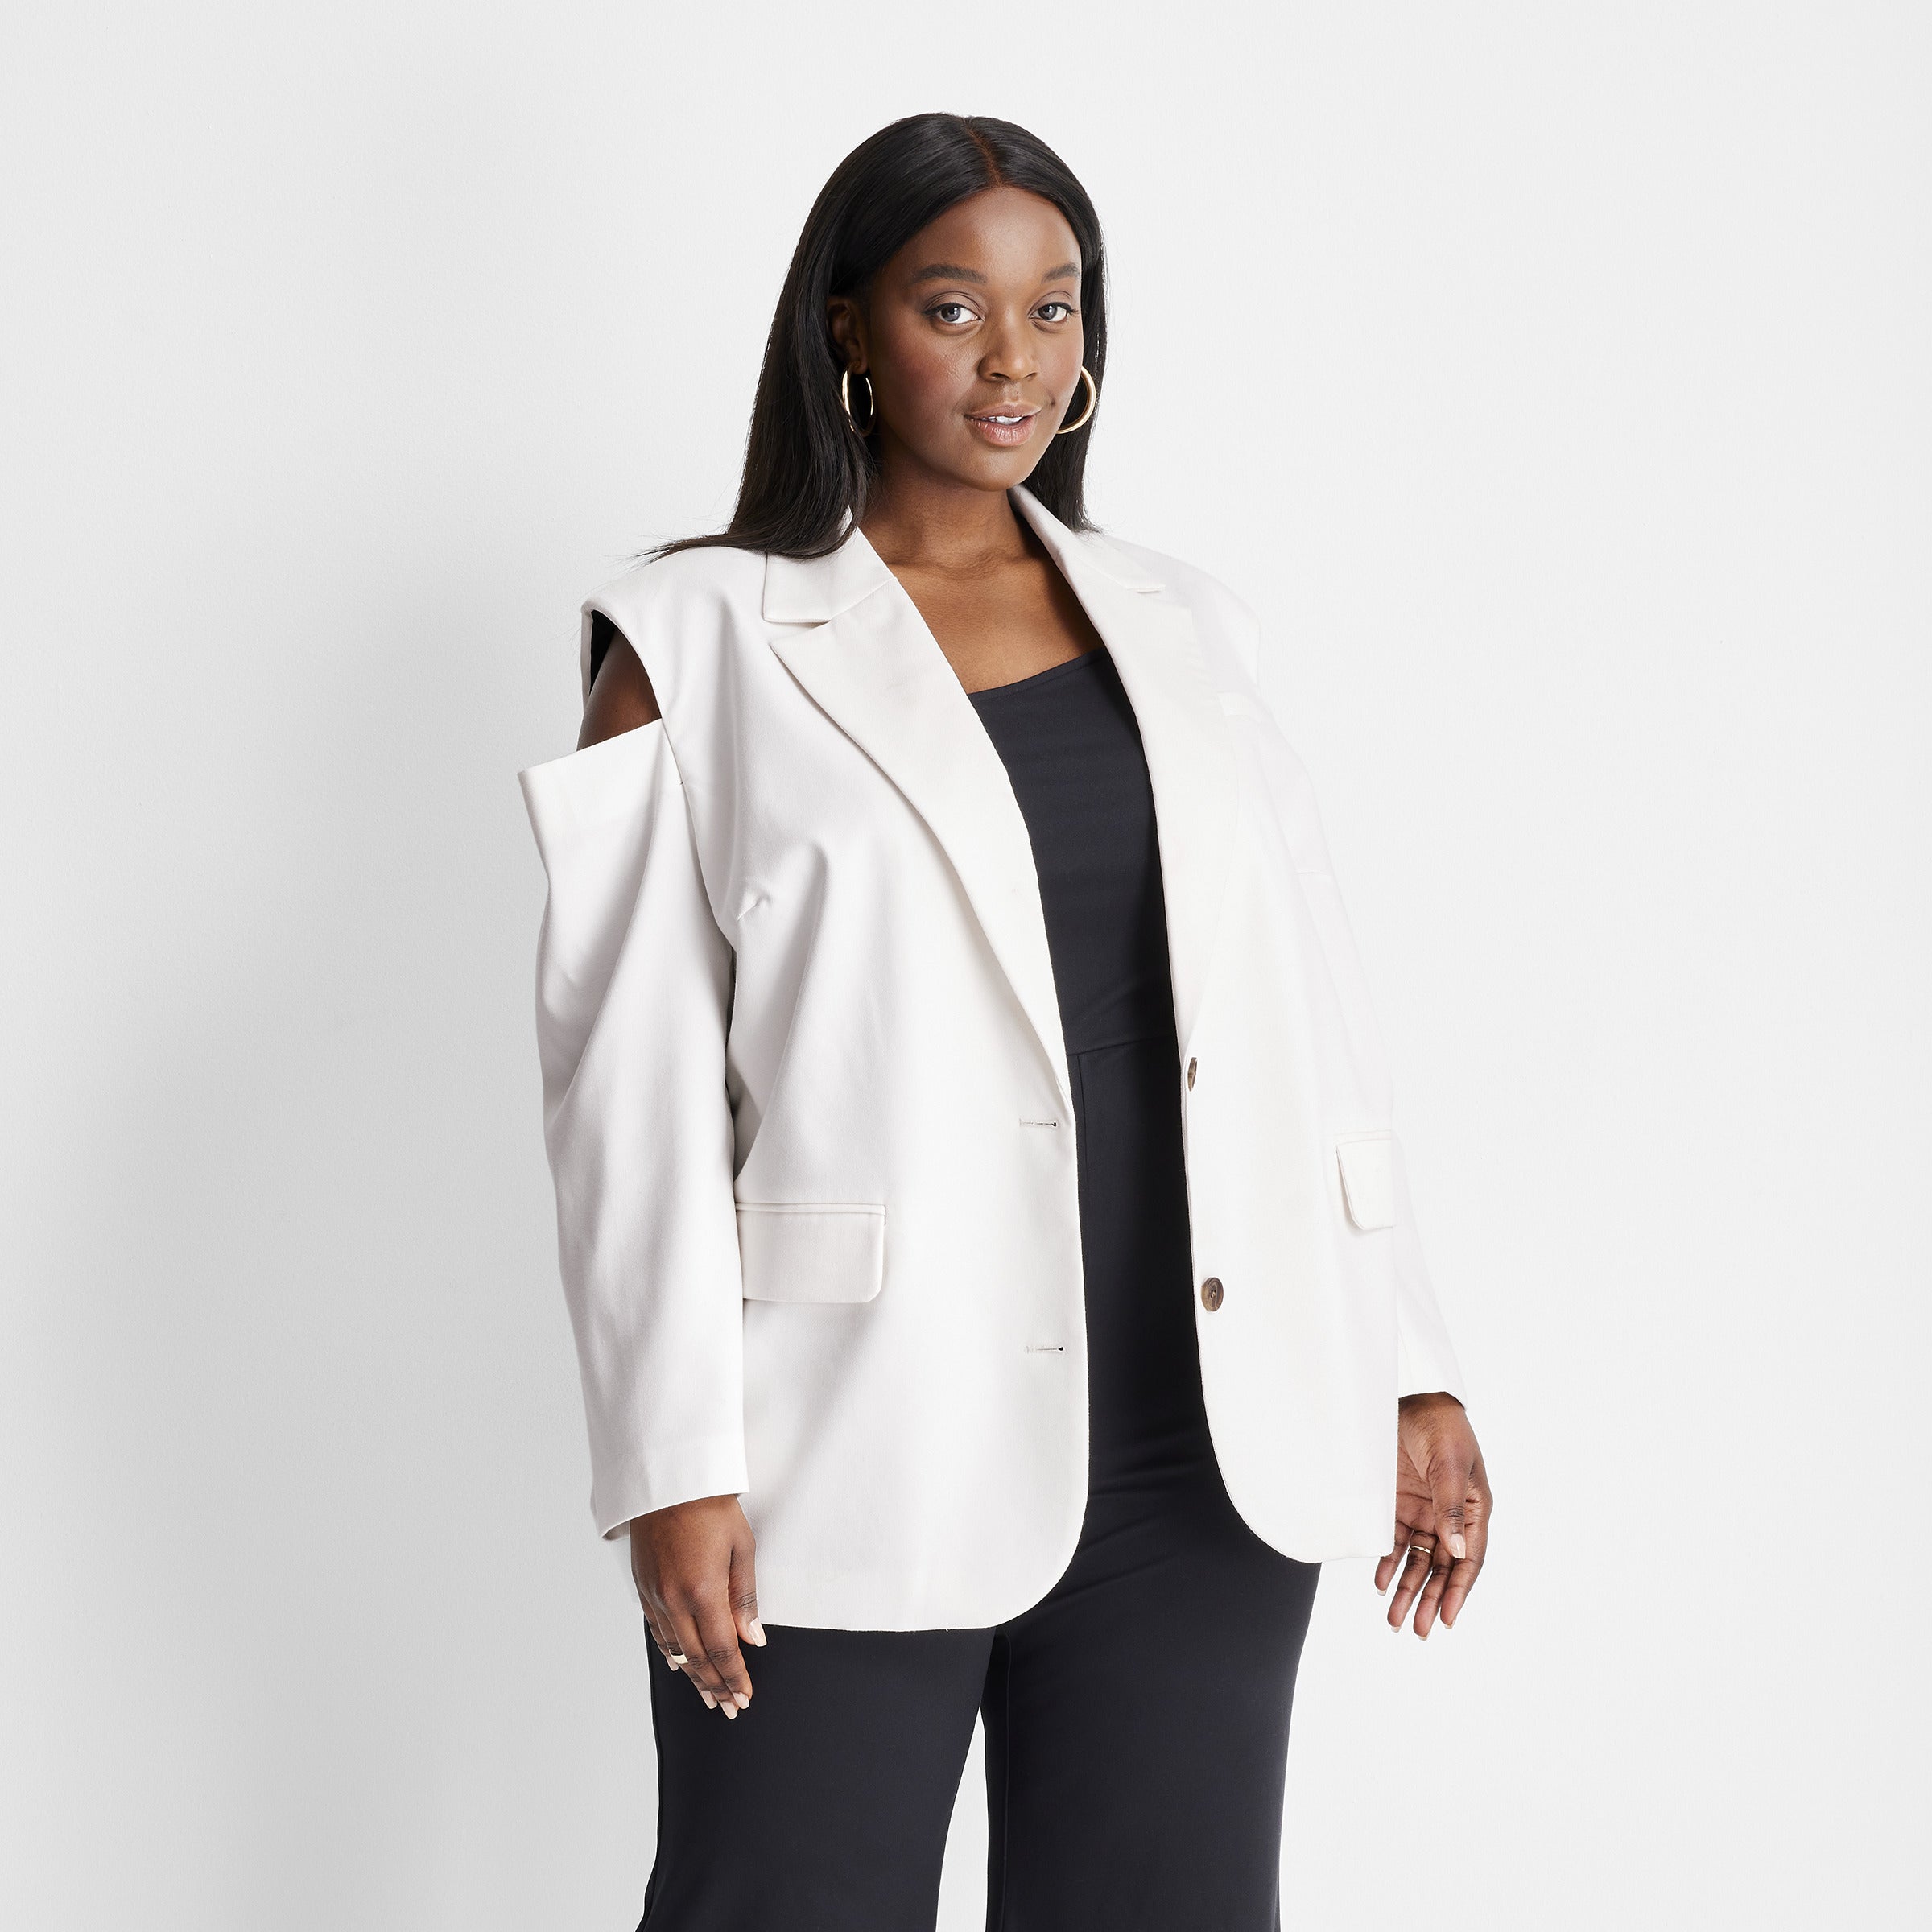 Target’s Future Collective First Brand Designer | Kahlana Barfield Brown